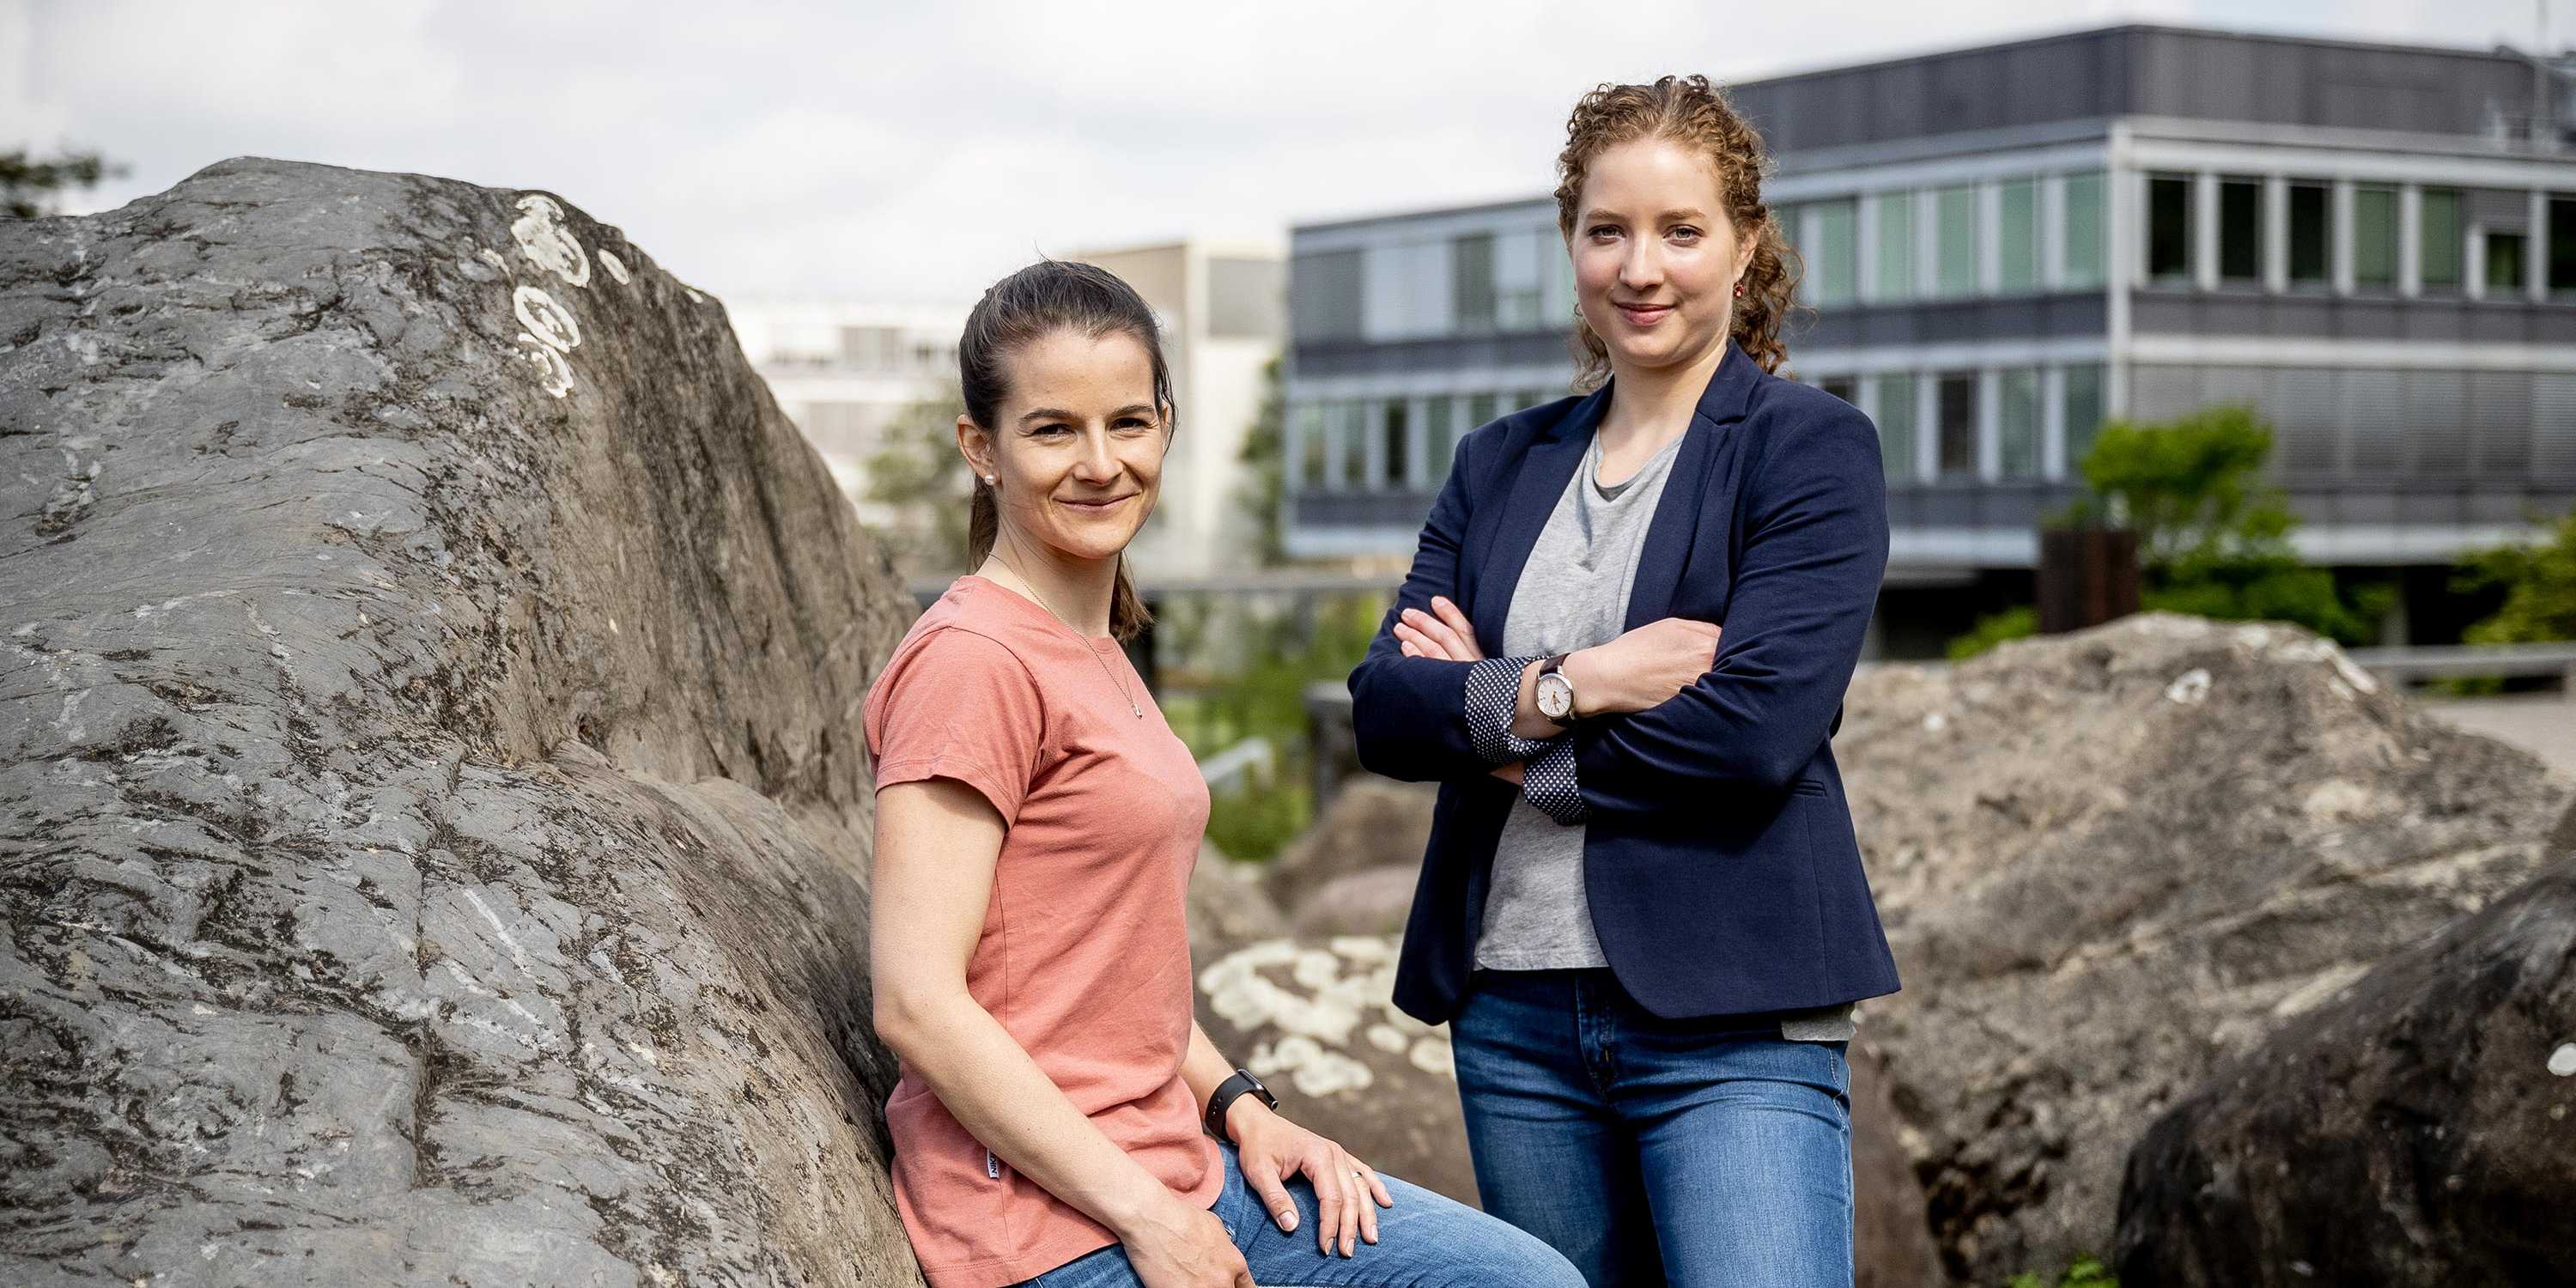 A picture of the two materials researchers Nicole Kleger (l.) und Simona Fehlmann.